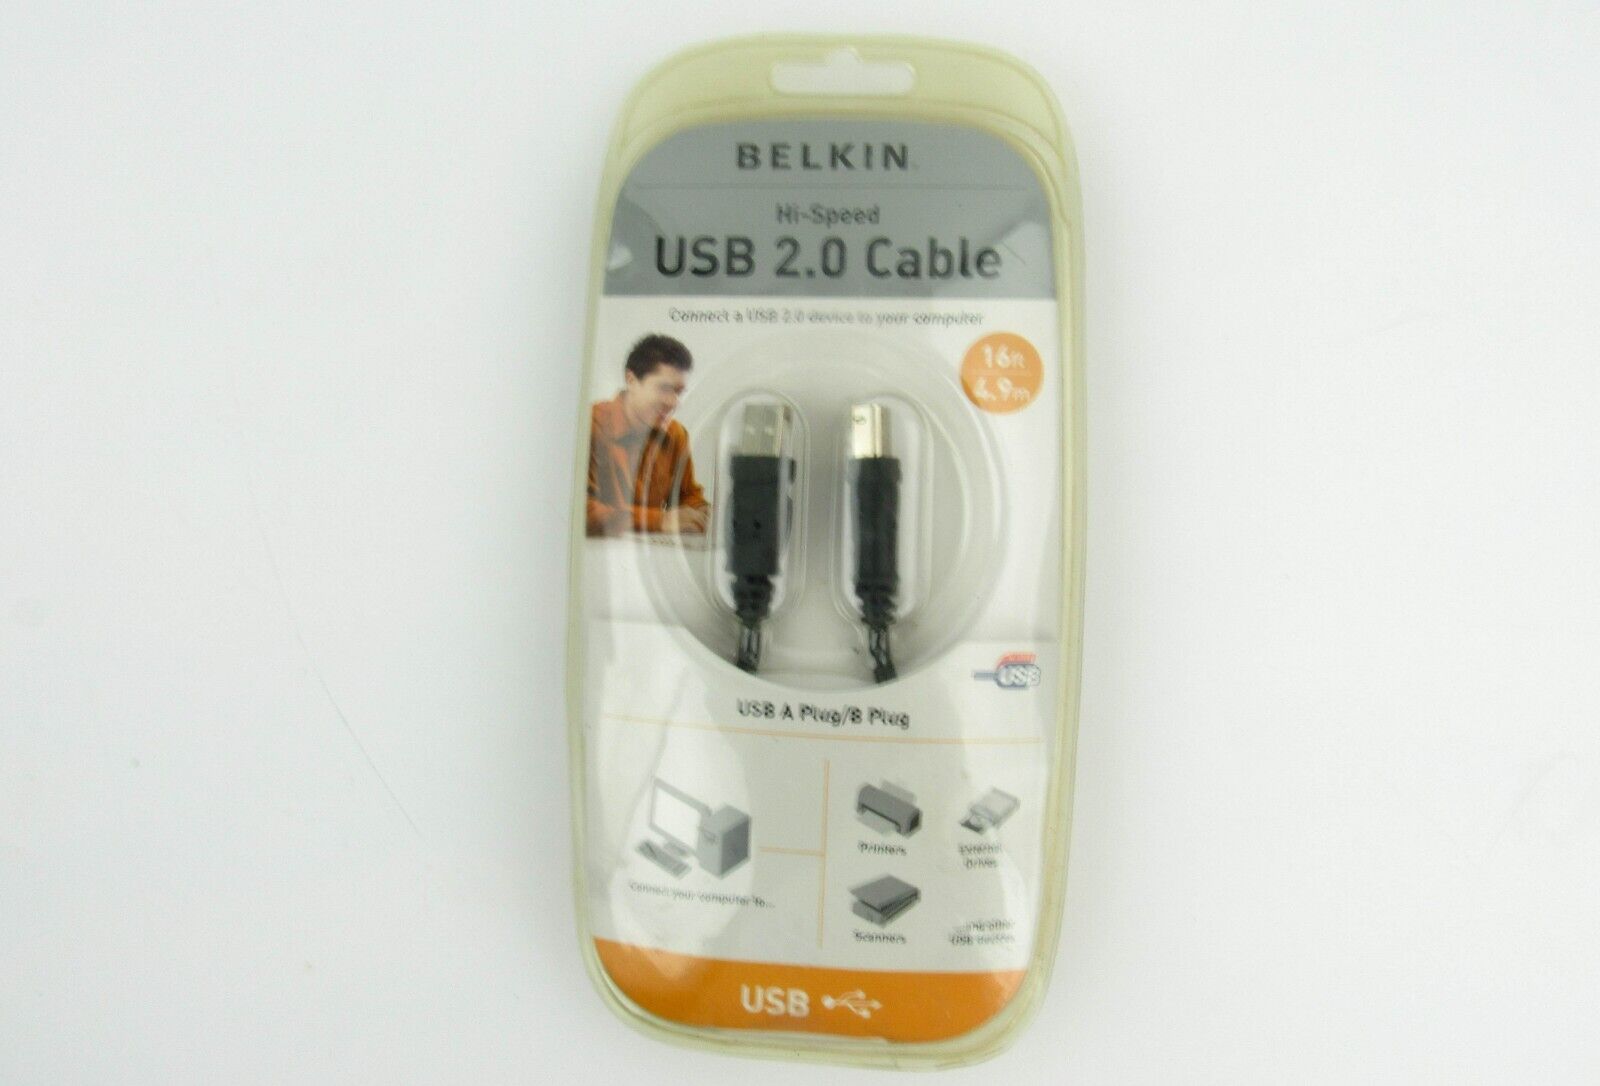 Belkin HI-Speed USB 2.0 Cable 16 Ft NEW SEALED